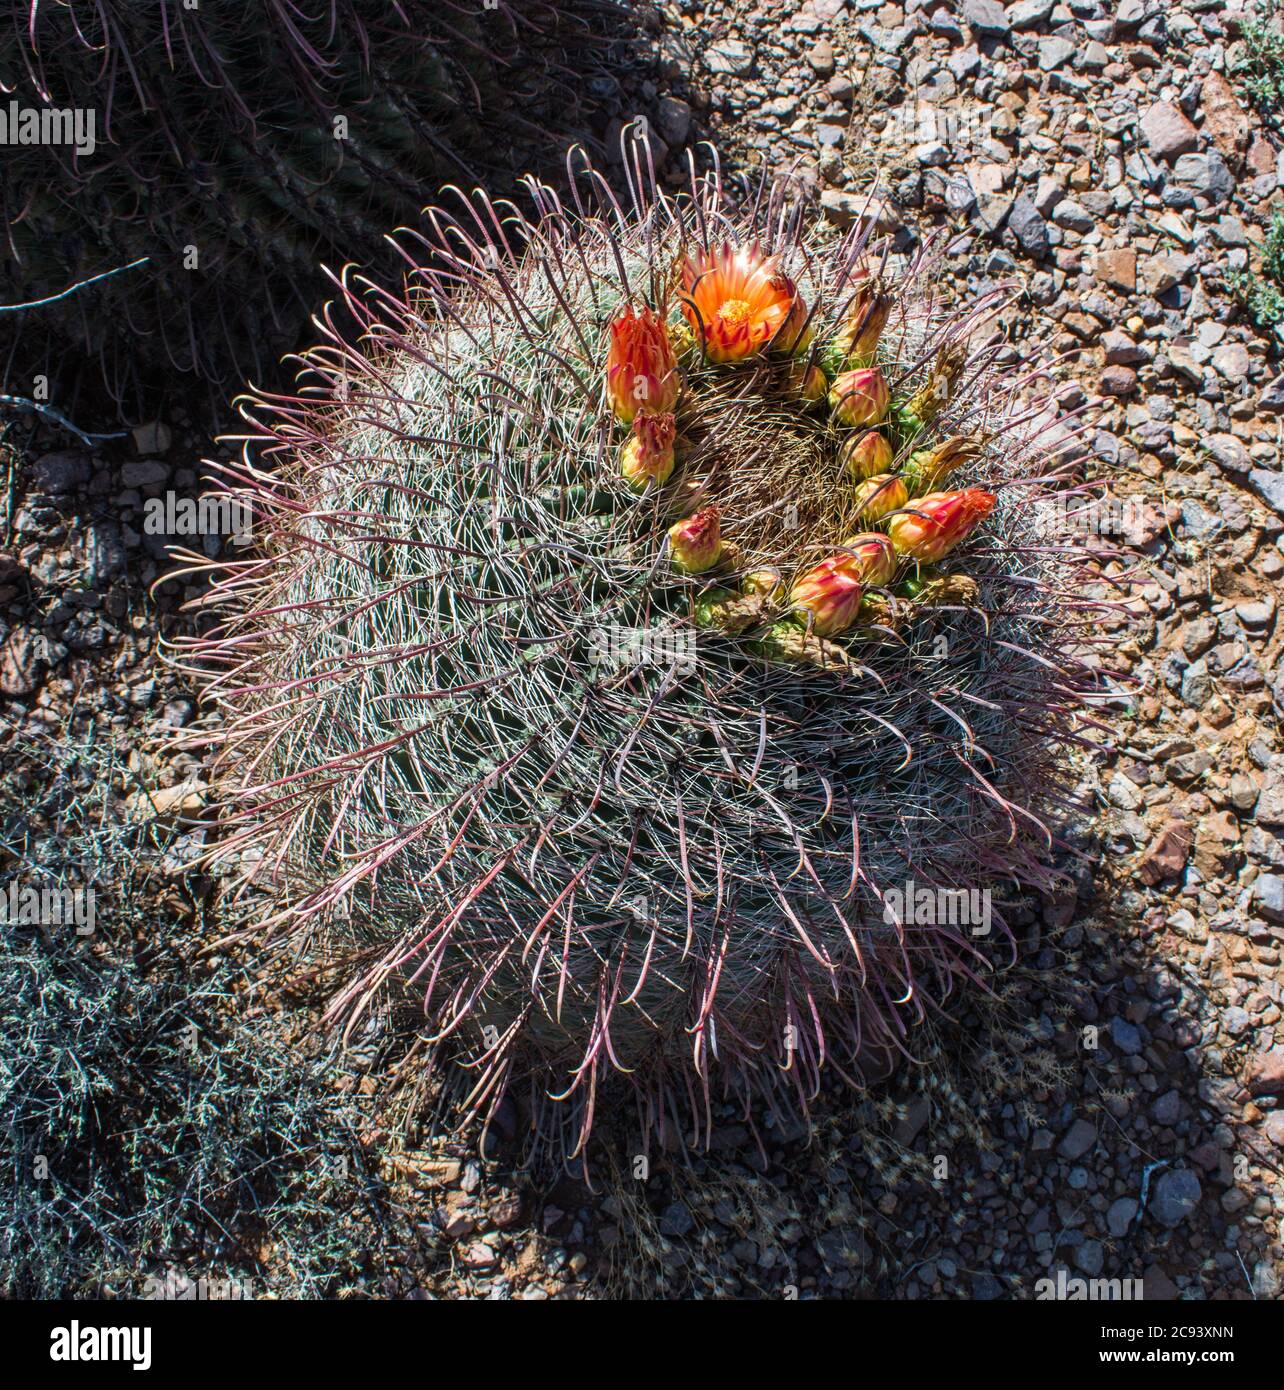 Barrel cactus in flower, New Mexico Stock Photo